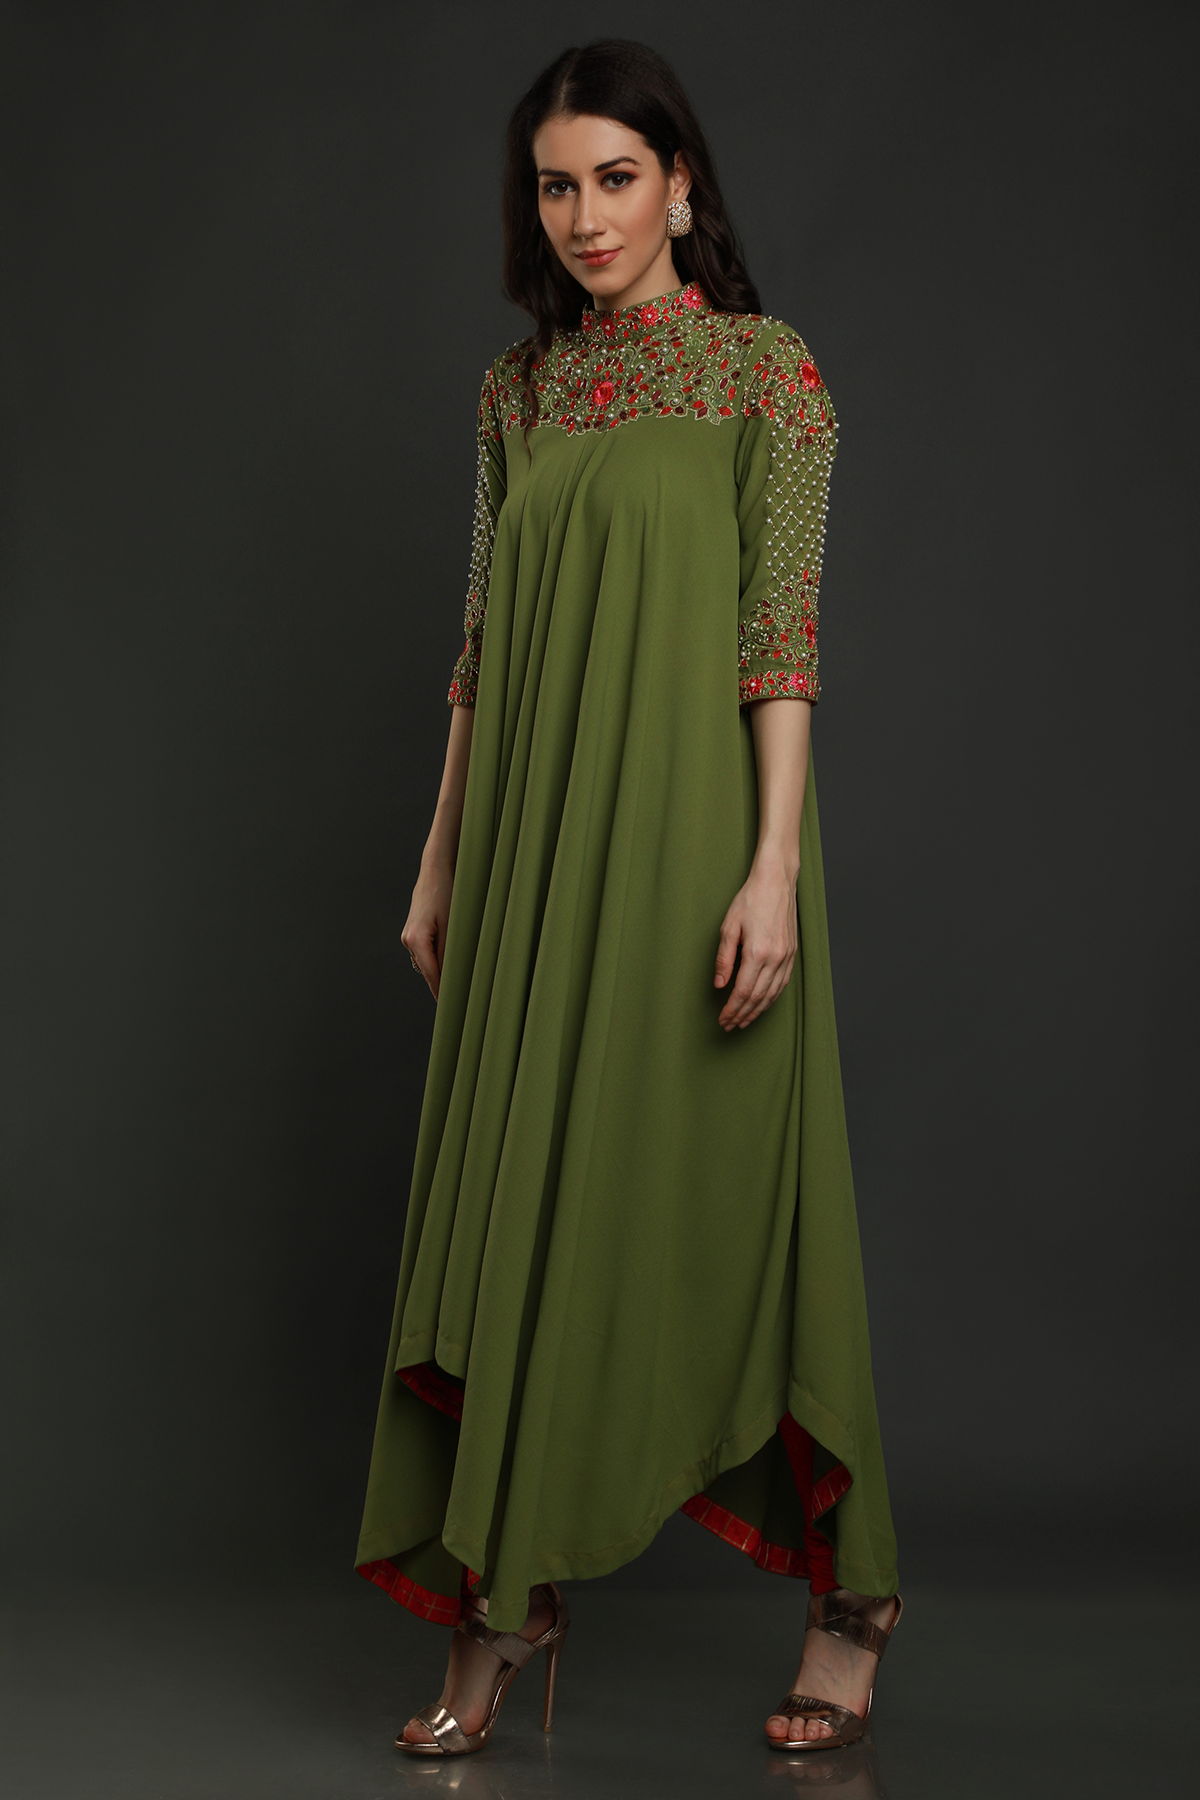 Elevate your elegance in a Mehendi Green Moss Crepe asymmetric maxi dress. Hand-embroidered with thread, pearls, and cut dana work for a unique flair.